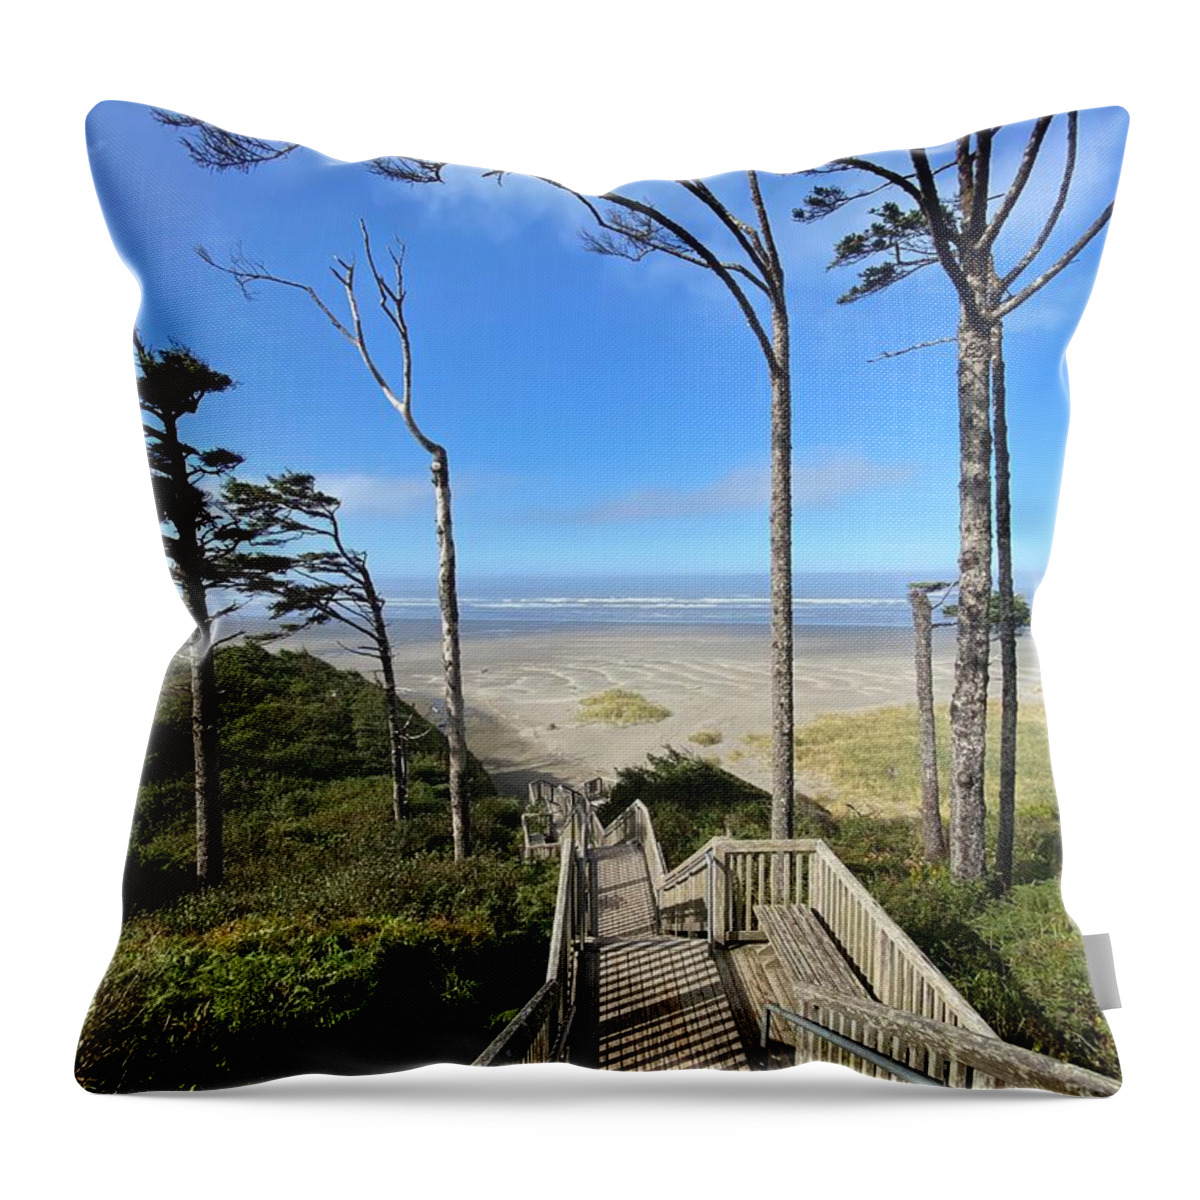 Ocean Throw Pillow featuring the photograph Seabrook Beach Stairs 2 by Jerry Abbott